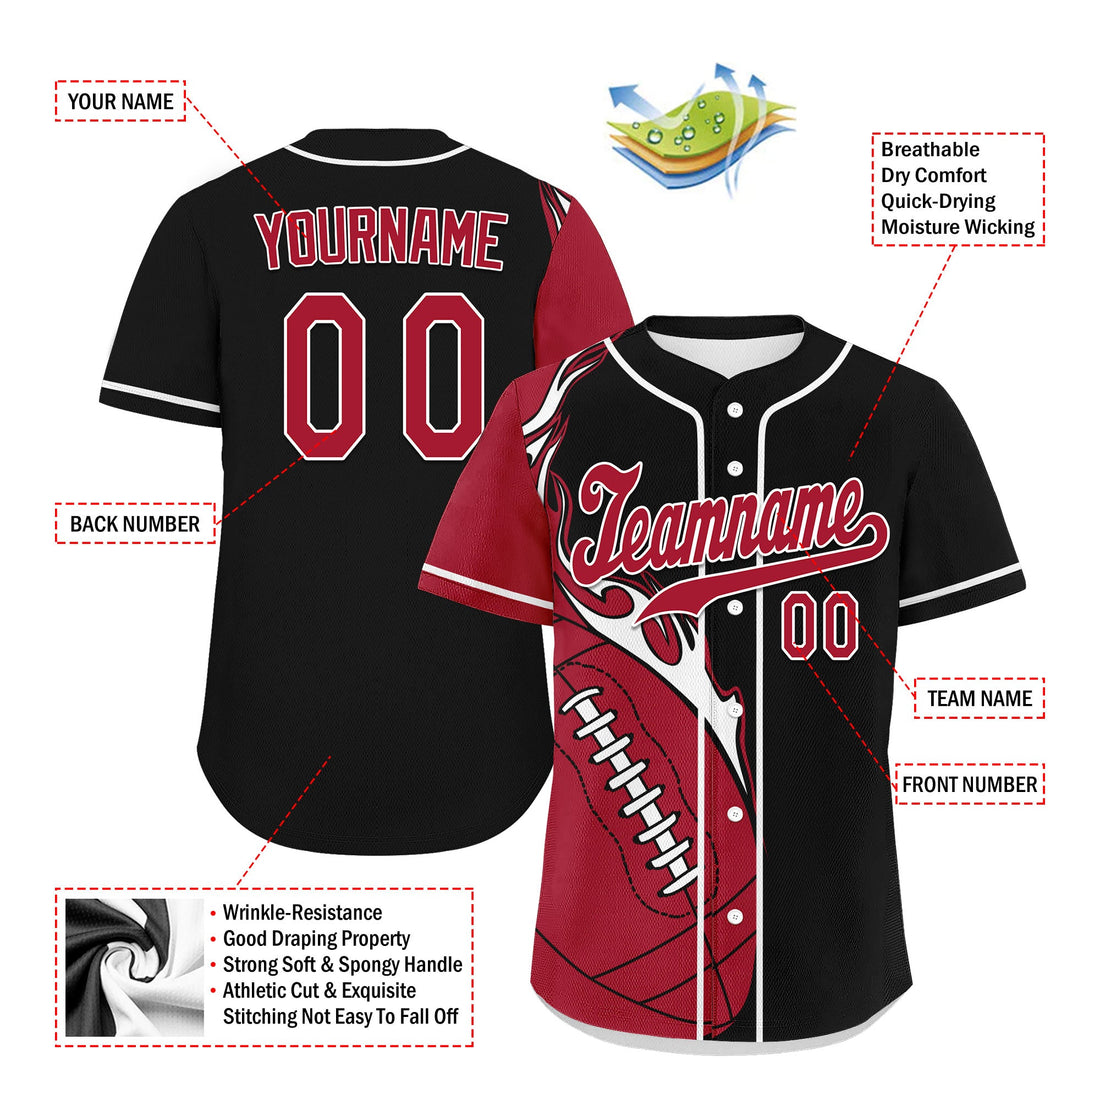 Custom Black Red Classic Style Personalized Authentic Baseball Jersey UN002-D0b0a00-d